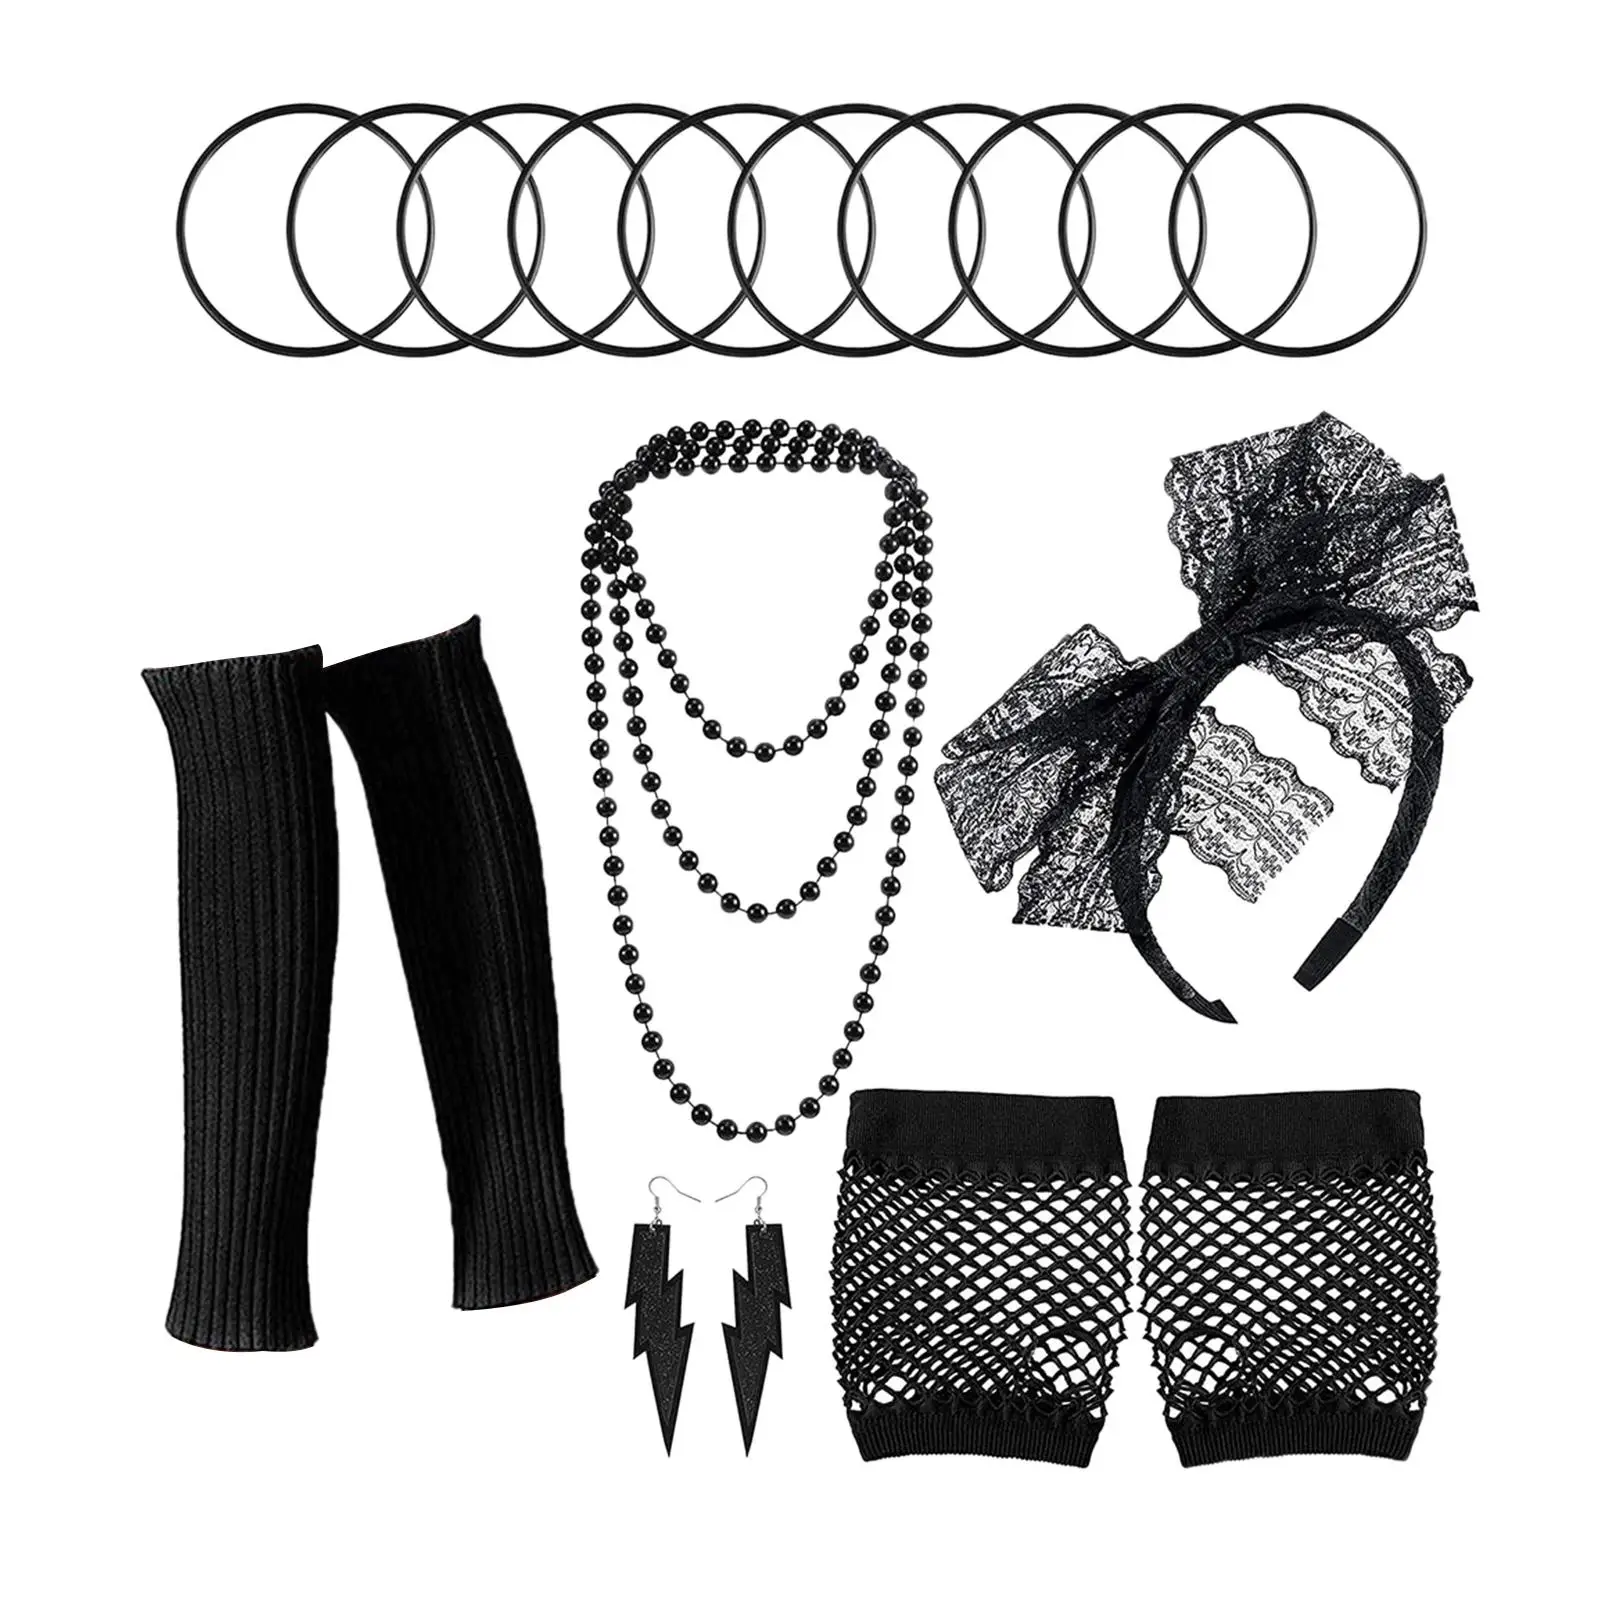 Women Costume Outfit Accessories Set Beads Necklace Outfit Bracelet Gloves for Party Halloween Stage Performance Bar Decoration